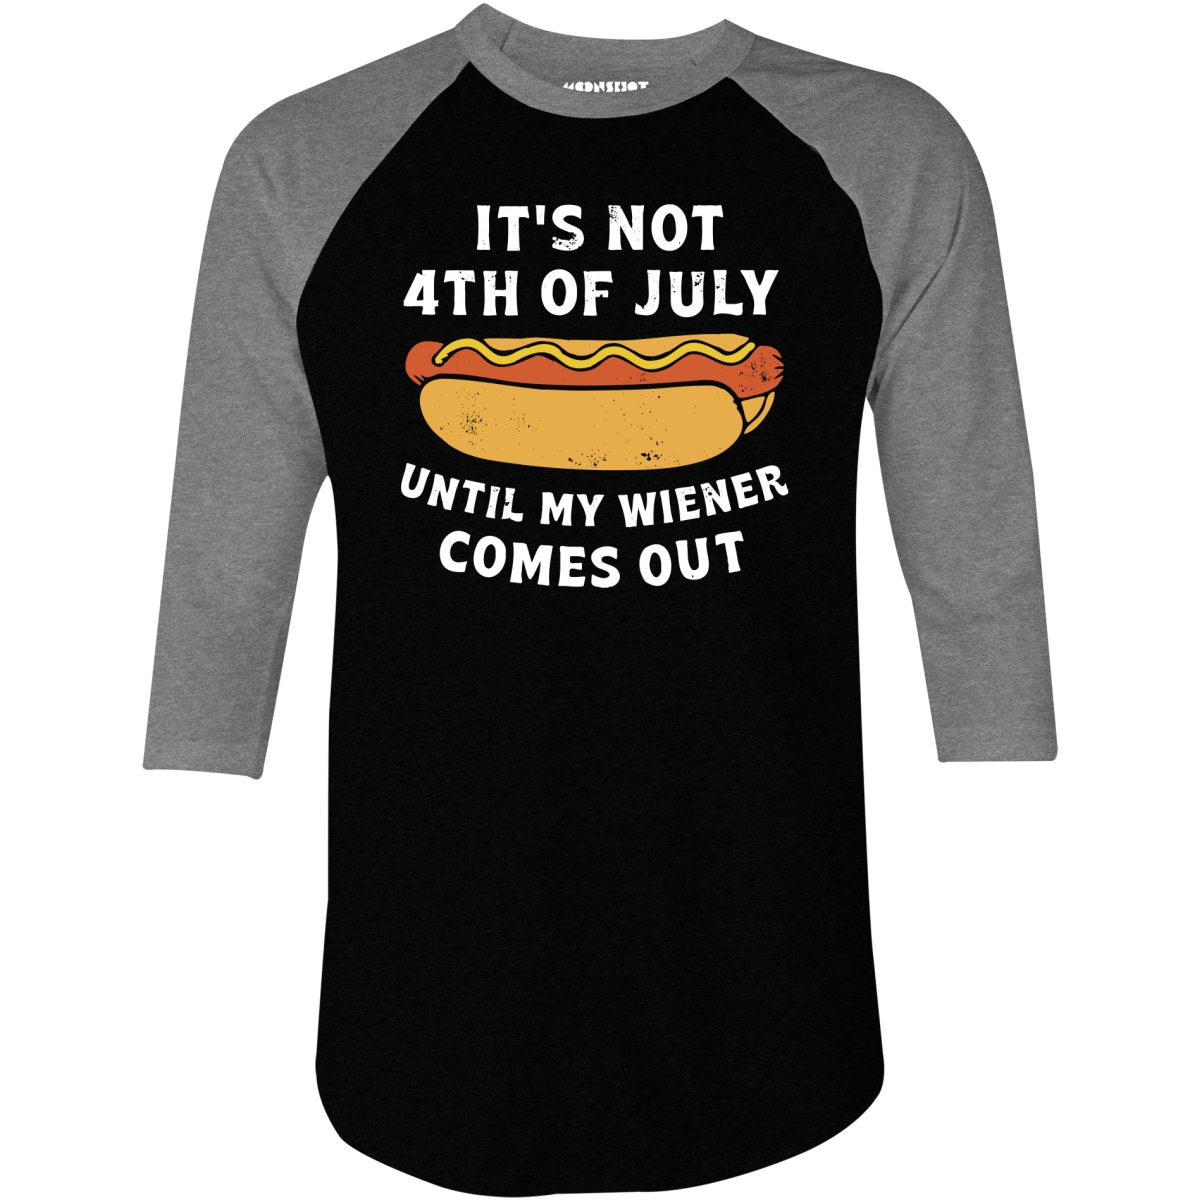 It's Not 4th of July Until My Wiener Comes Out - 3/4 Sleeve Raglan T-Shirt